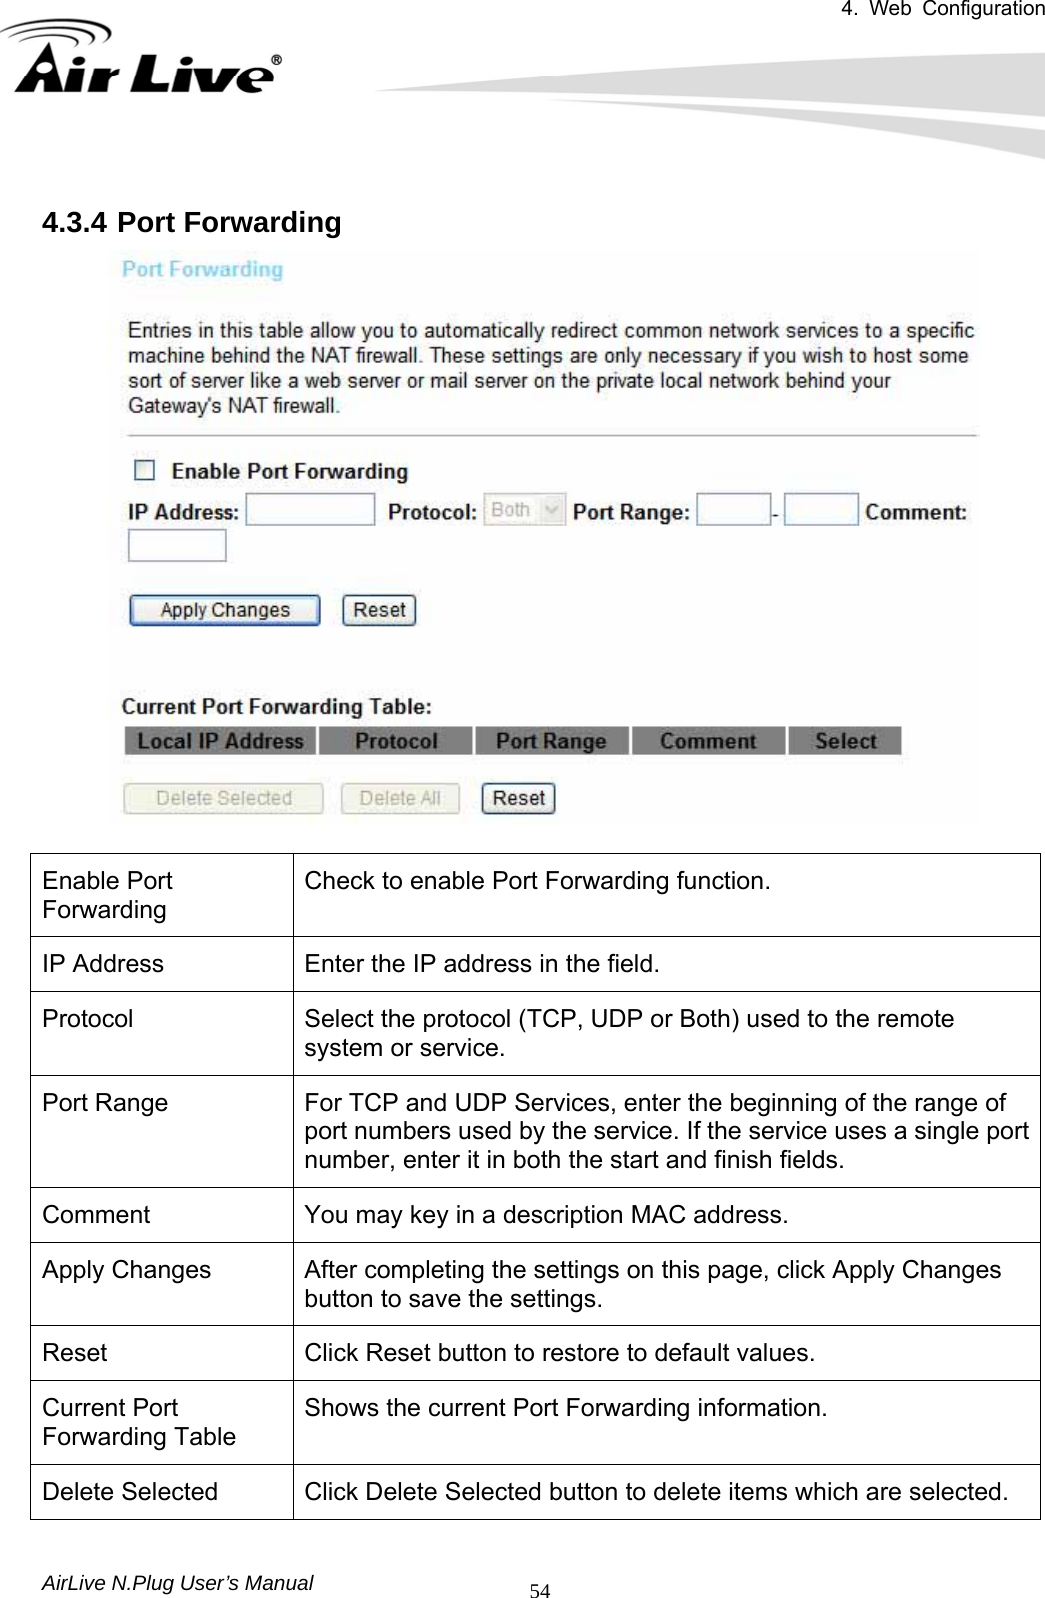 4. Web Configuration       AirLive N.Plug User’s Manual  54 4.3.4 Port Forwarding   Enable Port Forwarding Check to enable Port Forwarding function. IP Address  Enter the IP address in the field.       Protocol  Select the protocol (TCP, UDP or Both) used to the remote system or service. Port Range  For TCP and UDP Services, enter the beginning of the range of port numbers used by the service. If the service uses a single port number, enter it in both the start and finish fields. Comment  You may key in a description MAC address. Apply Changes  After completing the settings on this page, click Apply Changes button to save the settings. Reset  Click Reset button to restore to default values. Current Port Forwarding Table Shows the current Port Forwarding information. Delete Selected  Click Delete Selected button to delete items which are selected. 